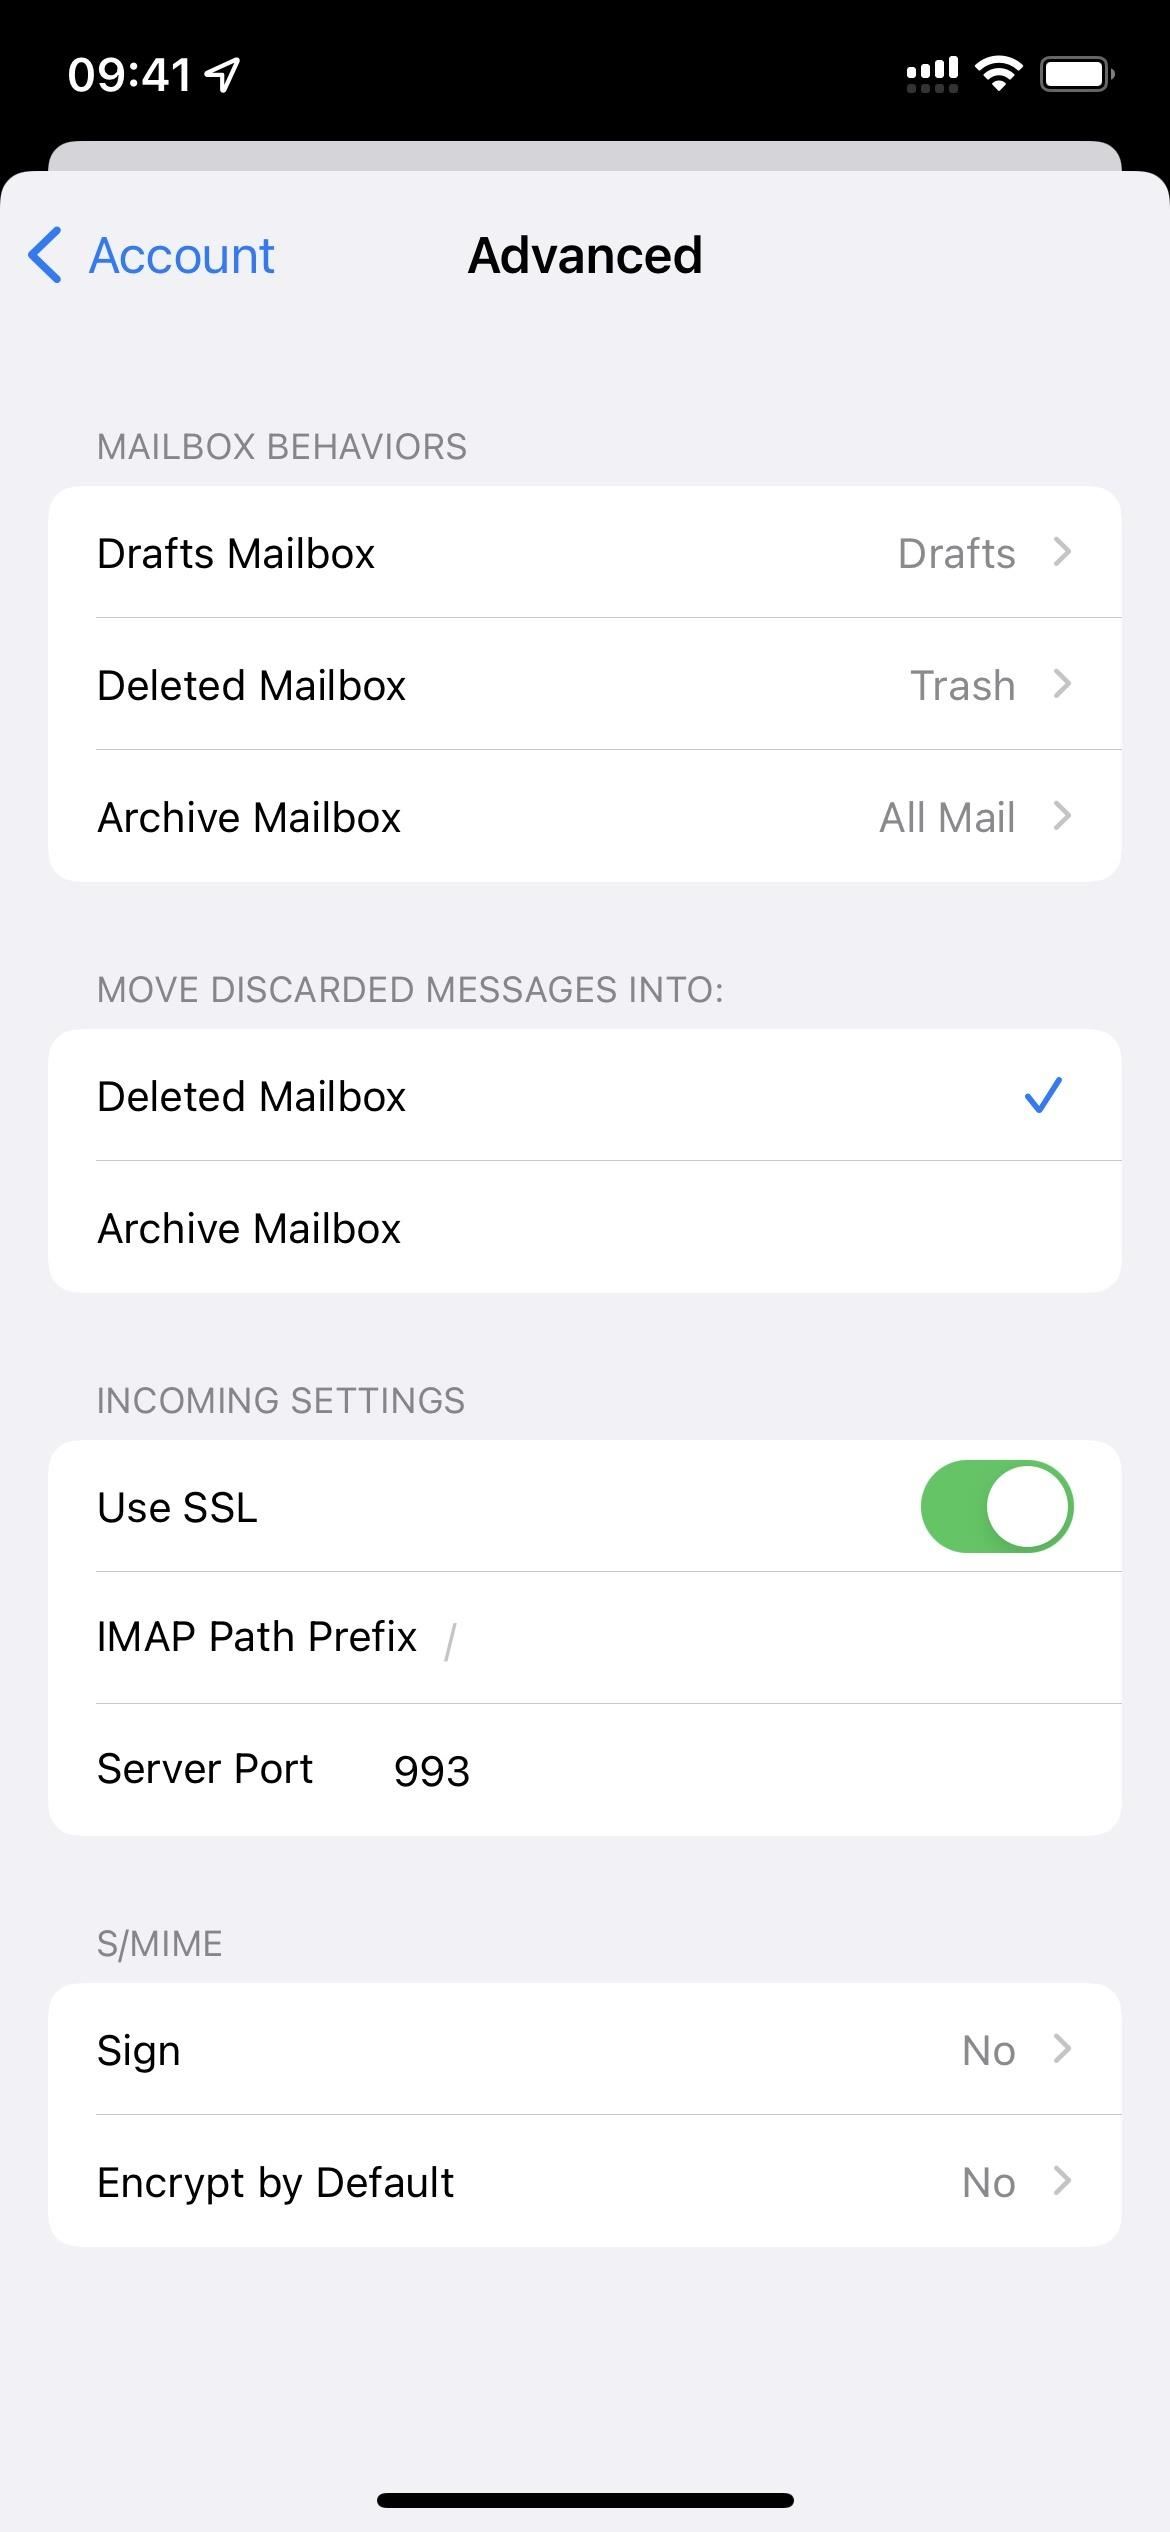 Use Your iPhone for End-to-End Encryption of Gmail Messages for Extra Secure Emails